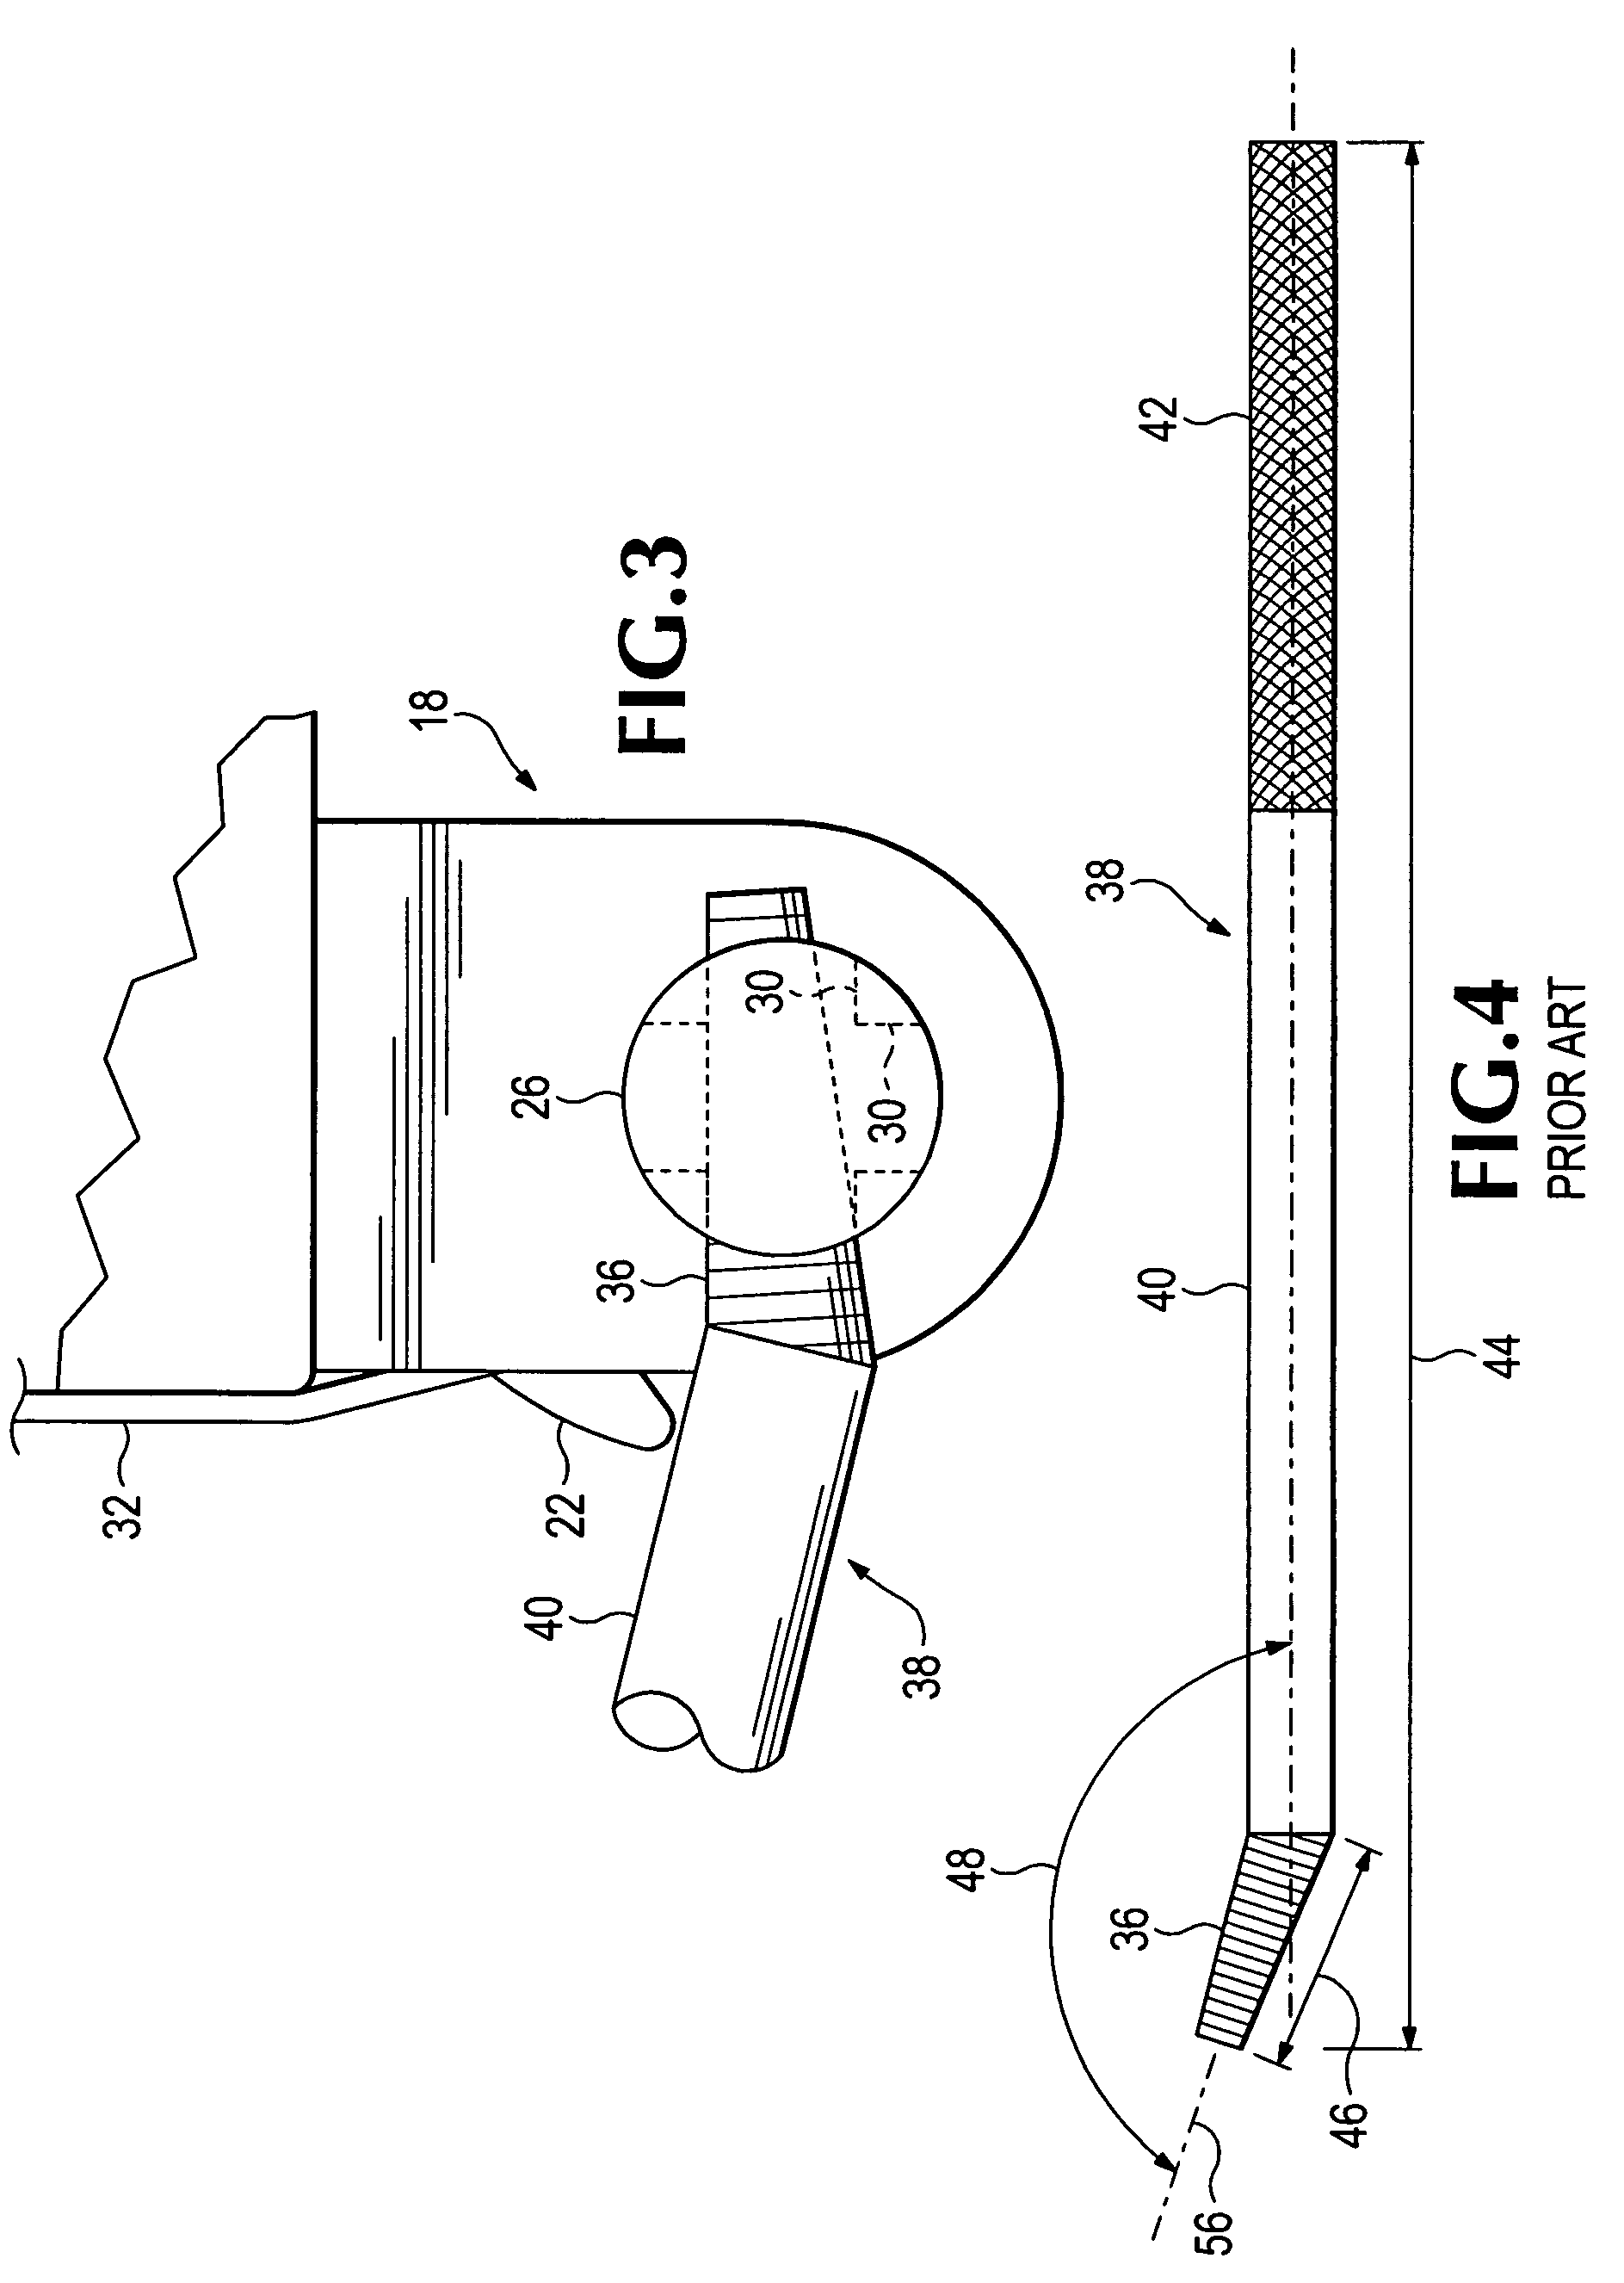 Winch bar with offset handle